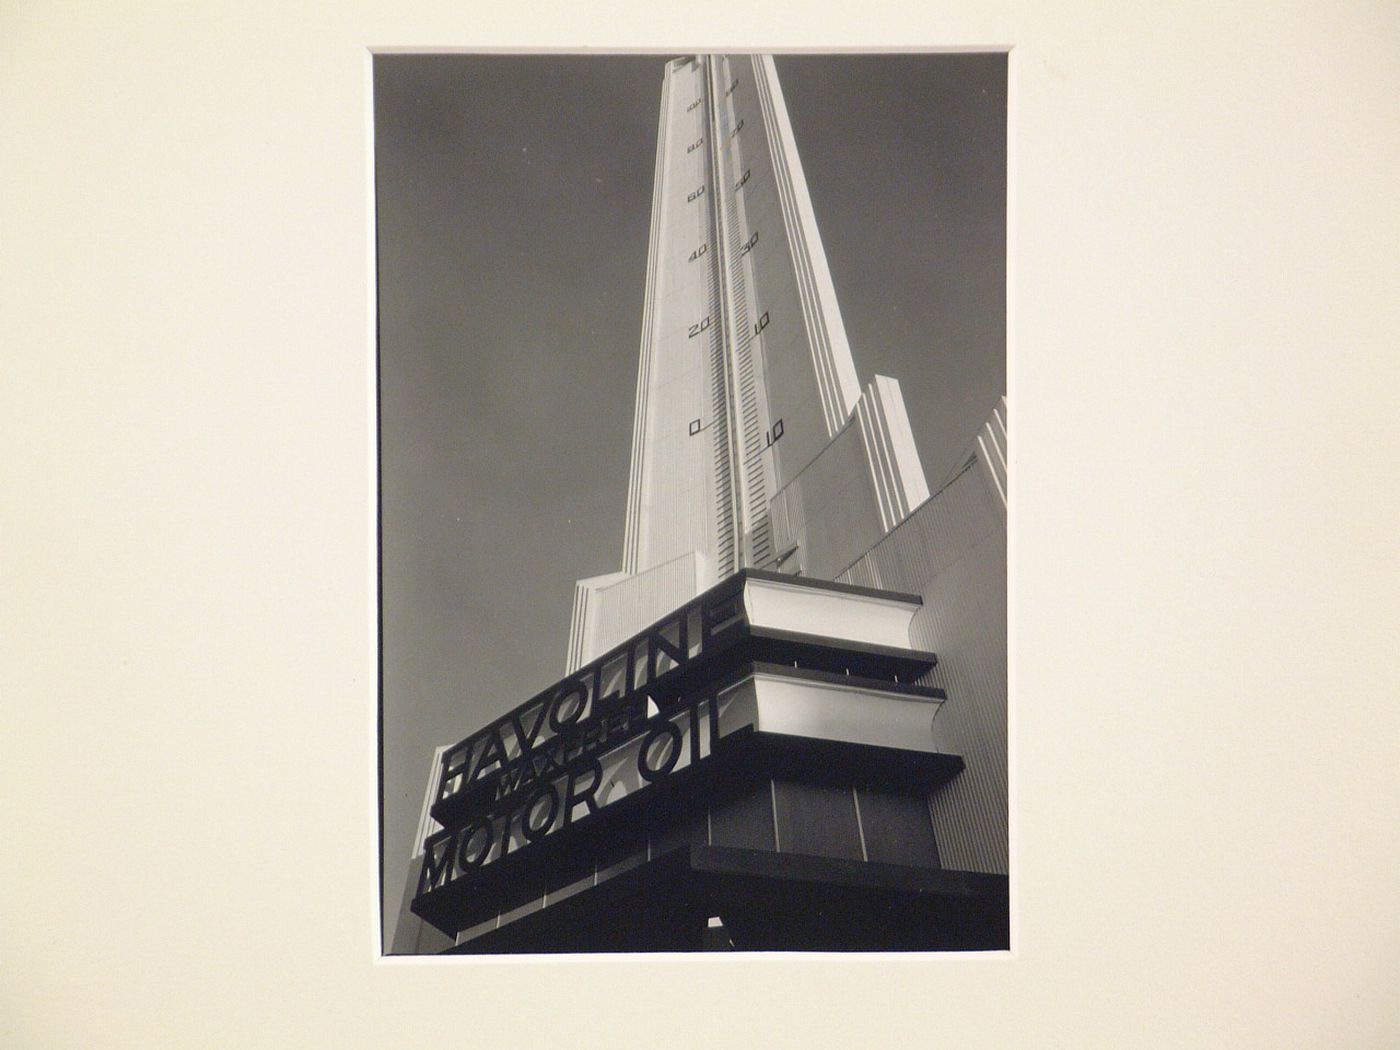 View of the Havoline Thermometer tower from below, Havoline Motor Oil Company exhibition building, 1933-1934 Chicago Century of Progress Exhibition, Burnham Park (now Meigs Field), Chicago, Illinois